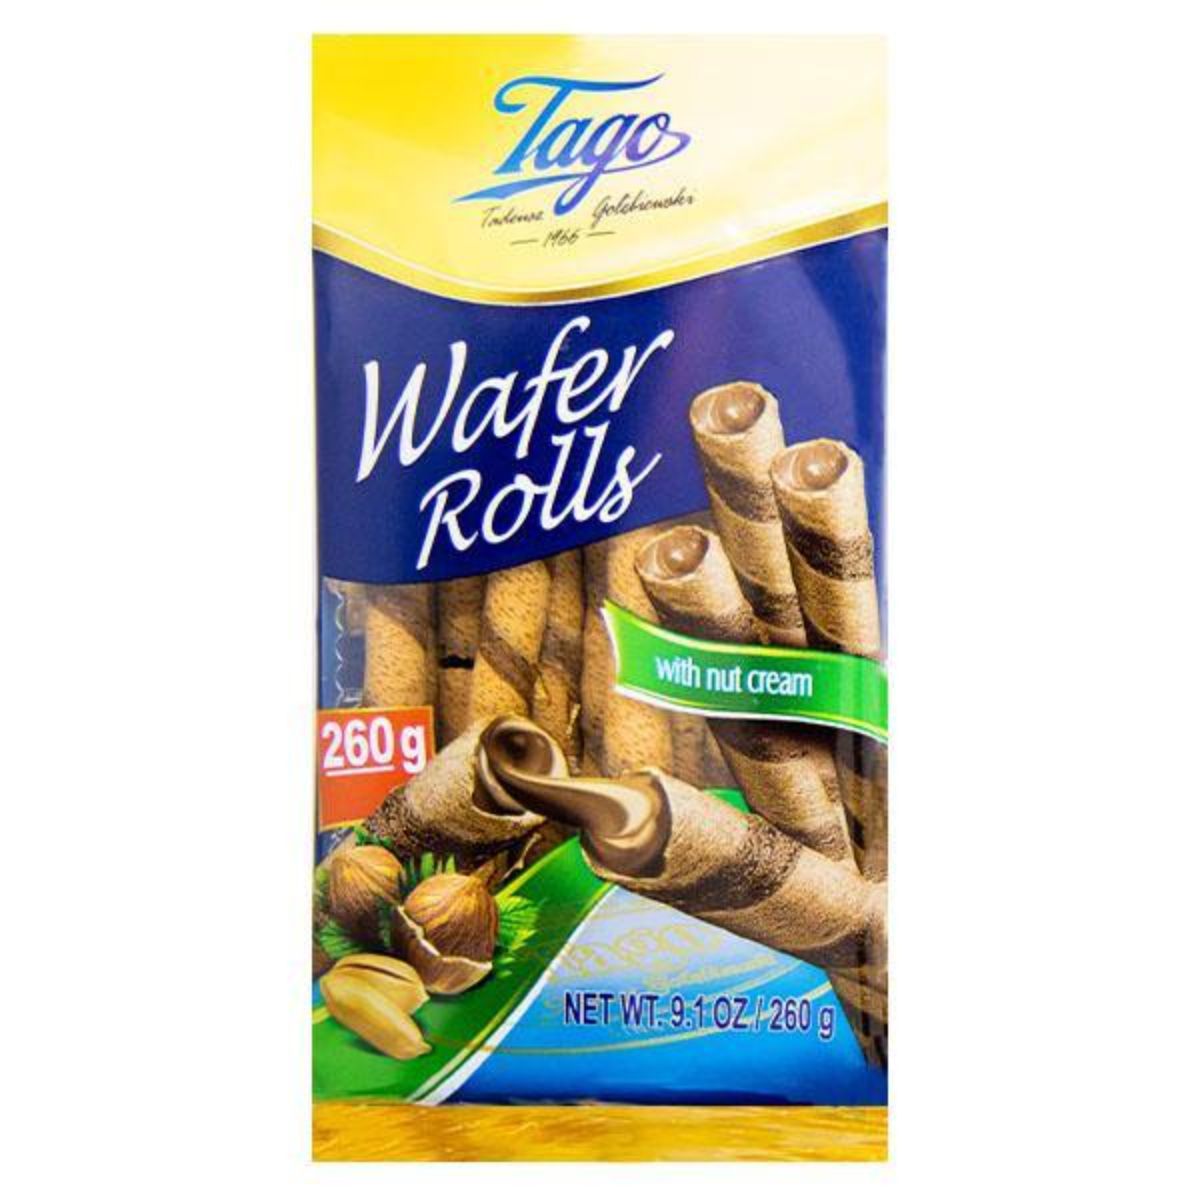 A package of Tago - Wafer Rolls with Hazelnuts - 260g rolls on a white background.